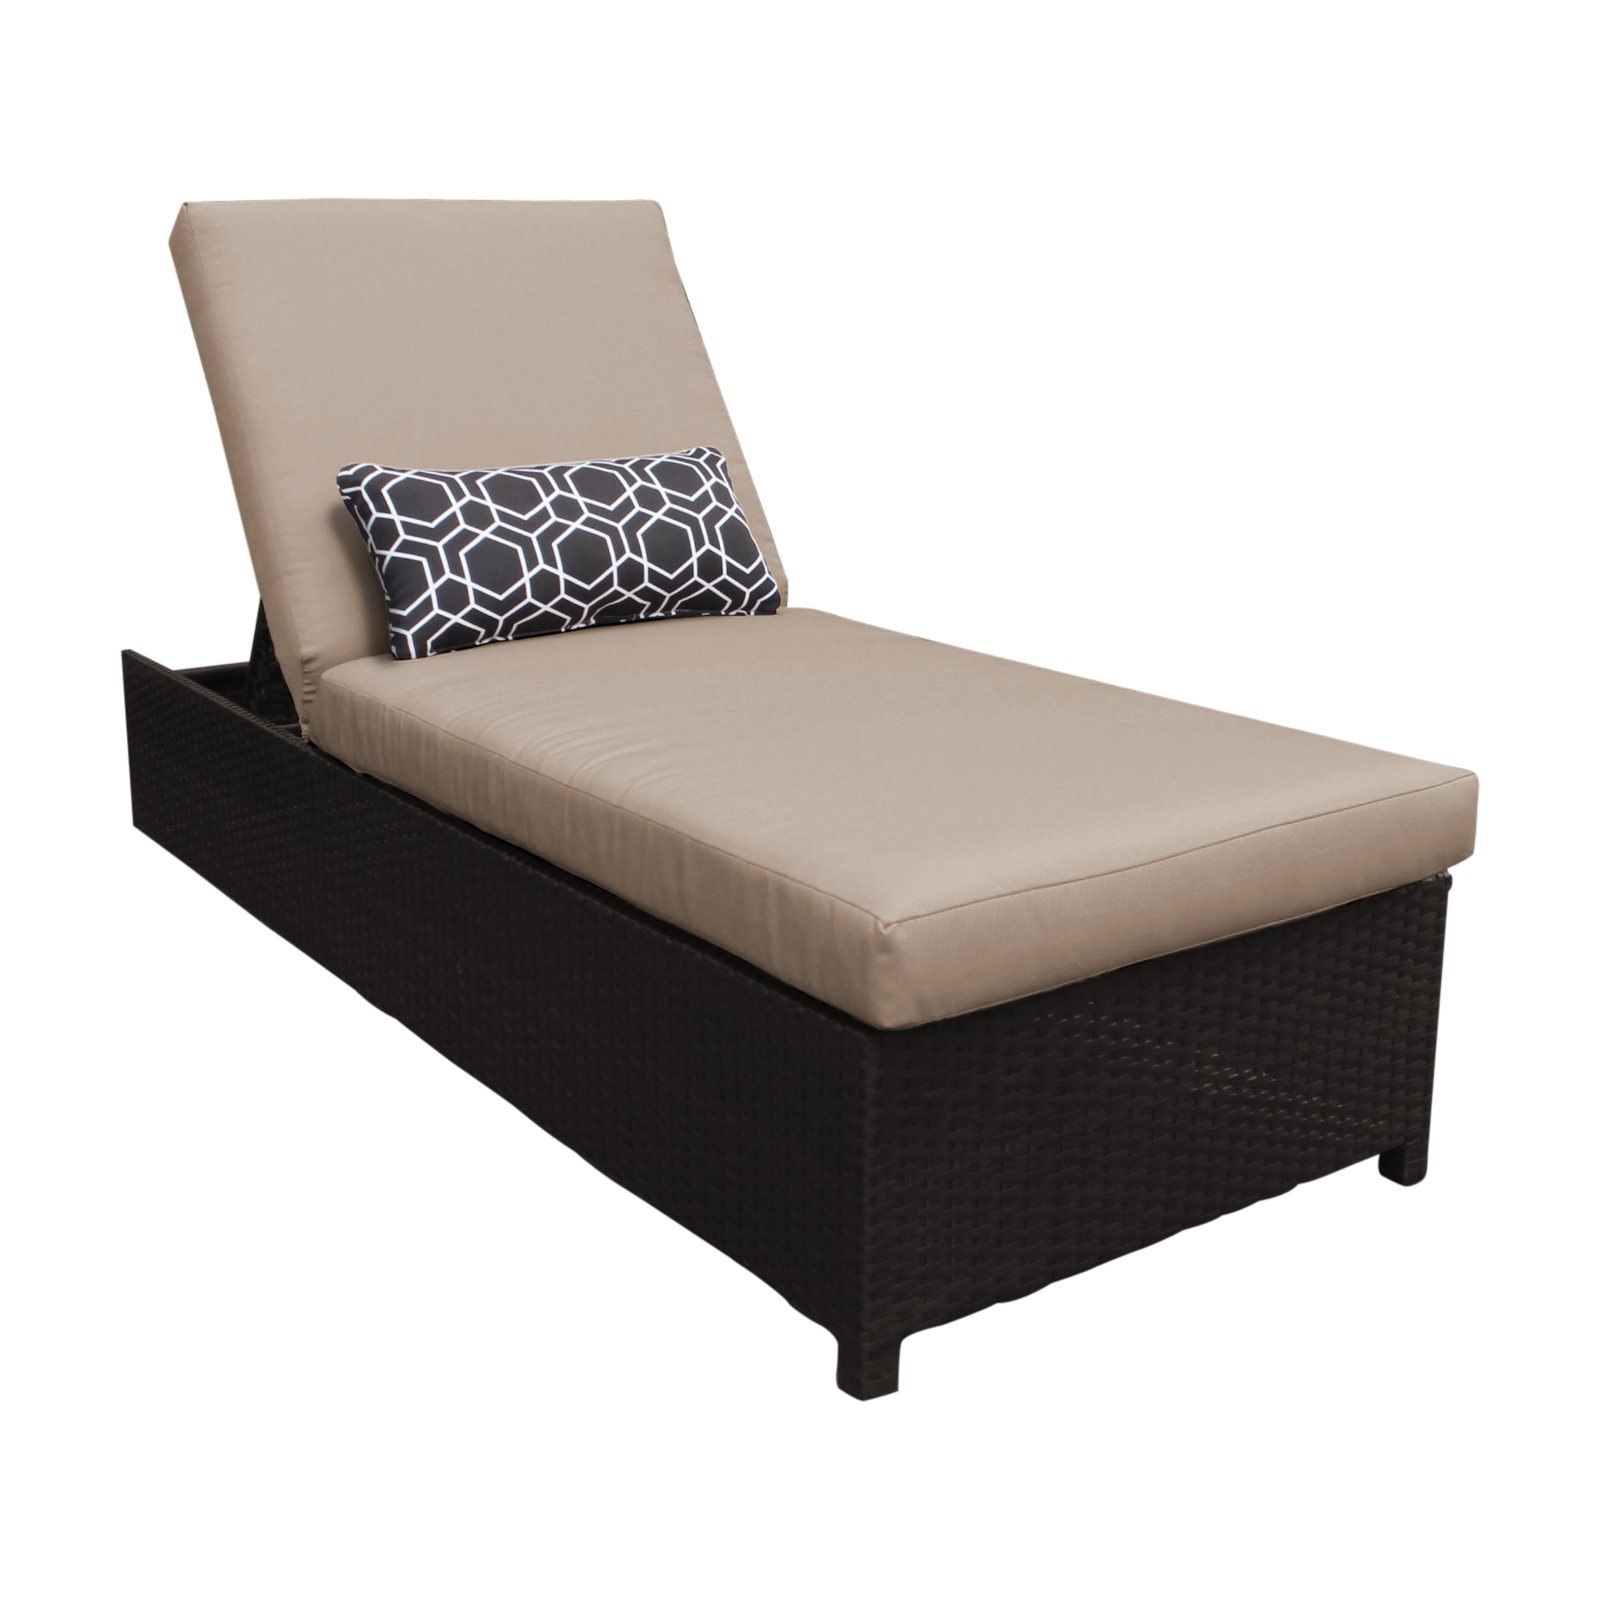 TK Classics Belle Wheeled Wicker Outdoor Chaise Lounge Chair - image 1 of 11